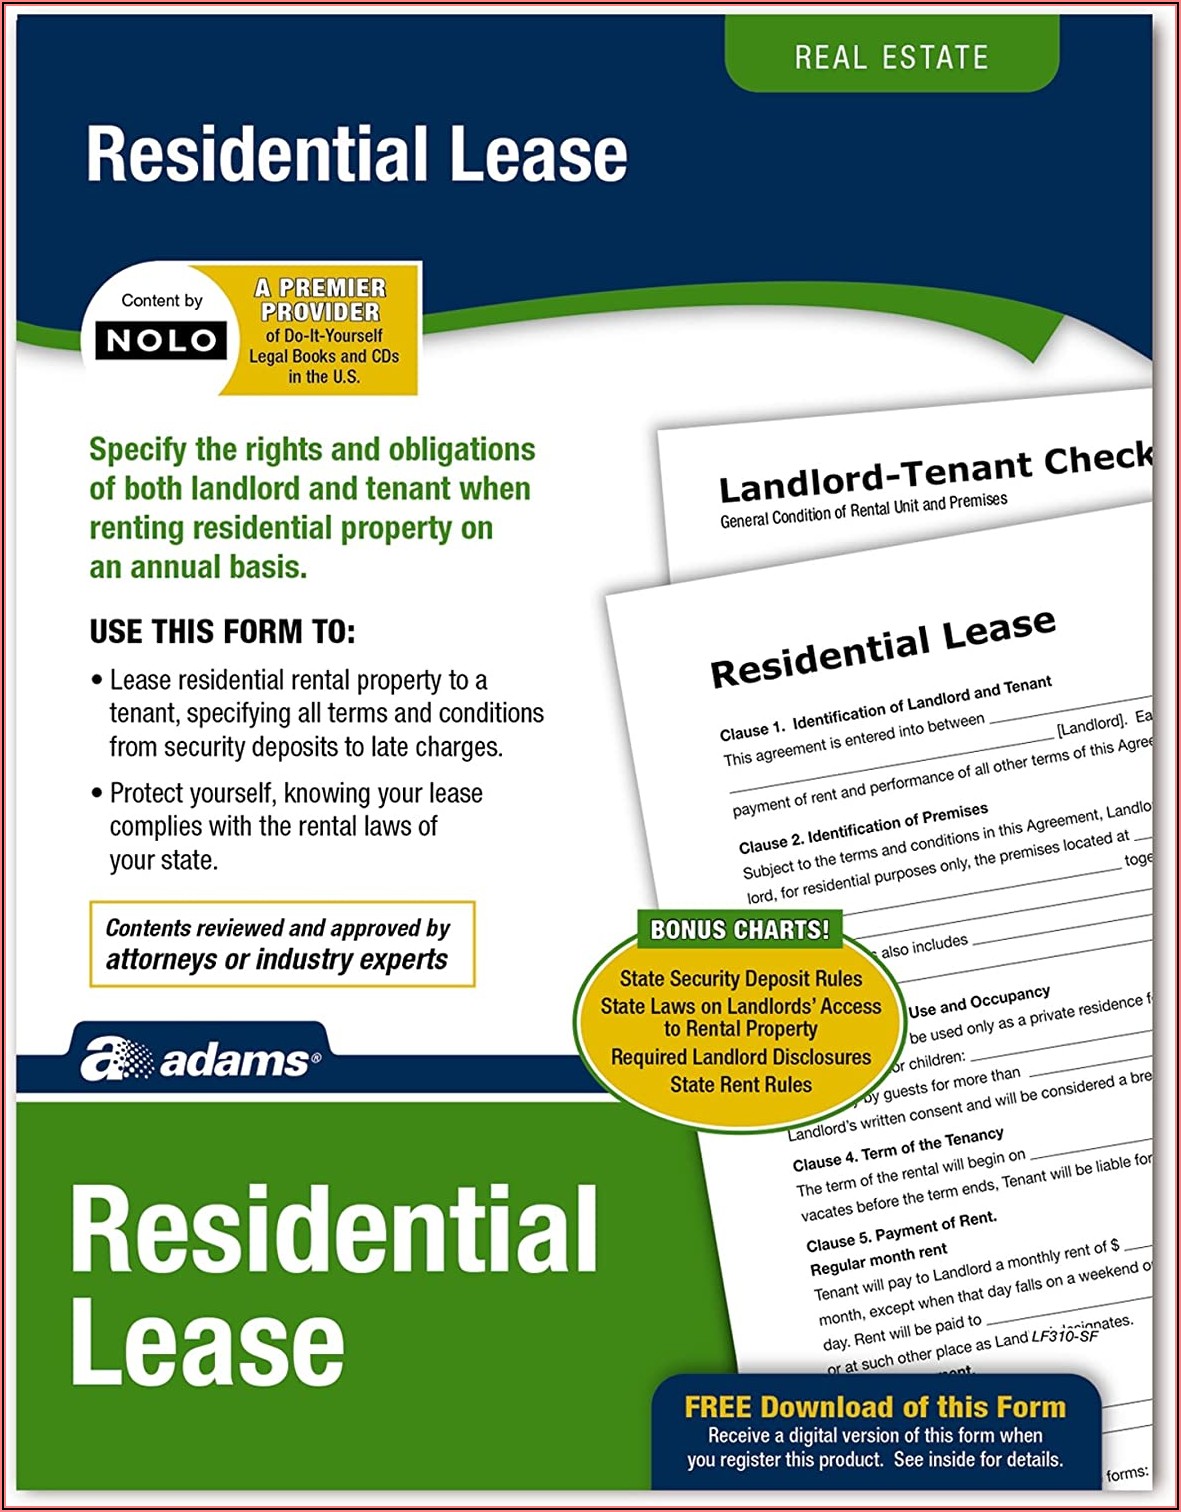 Adams Residential Lease Form Download